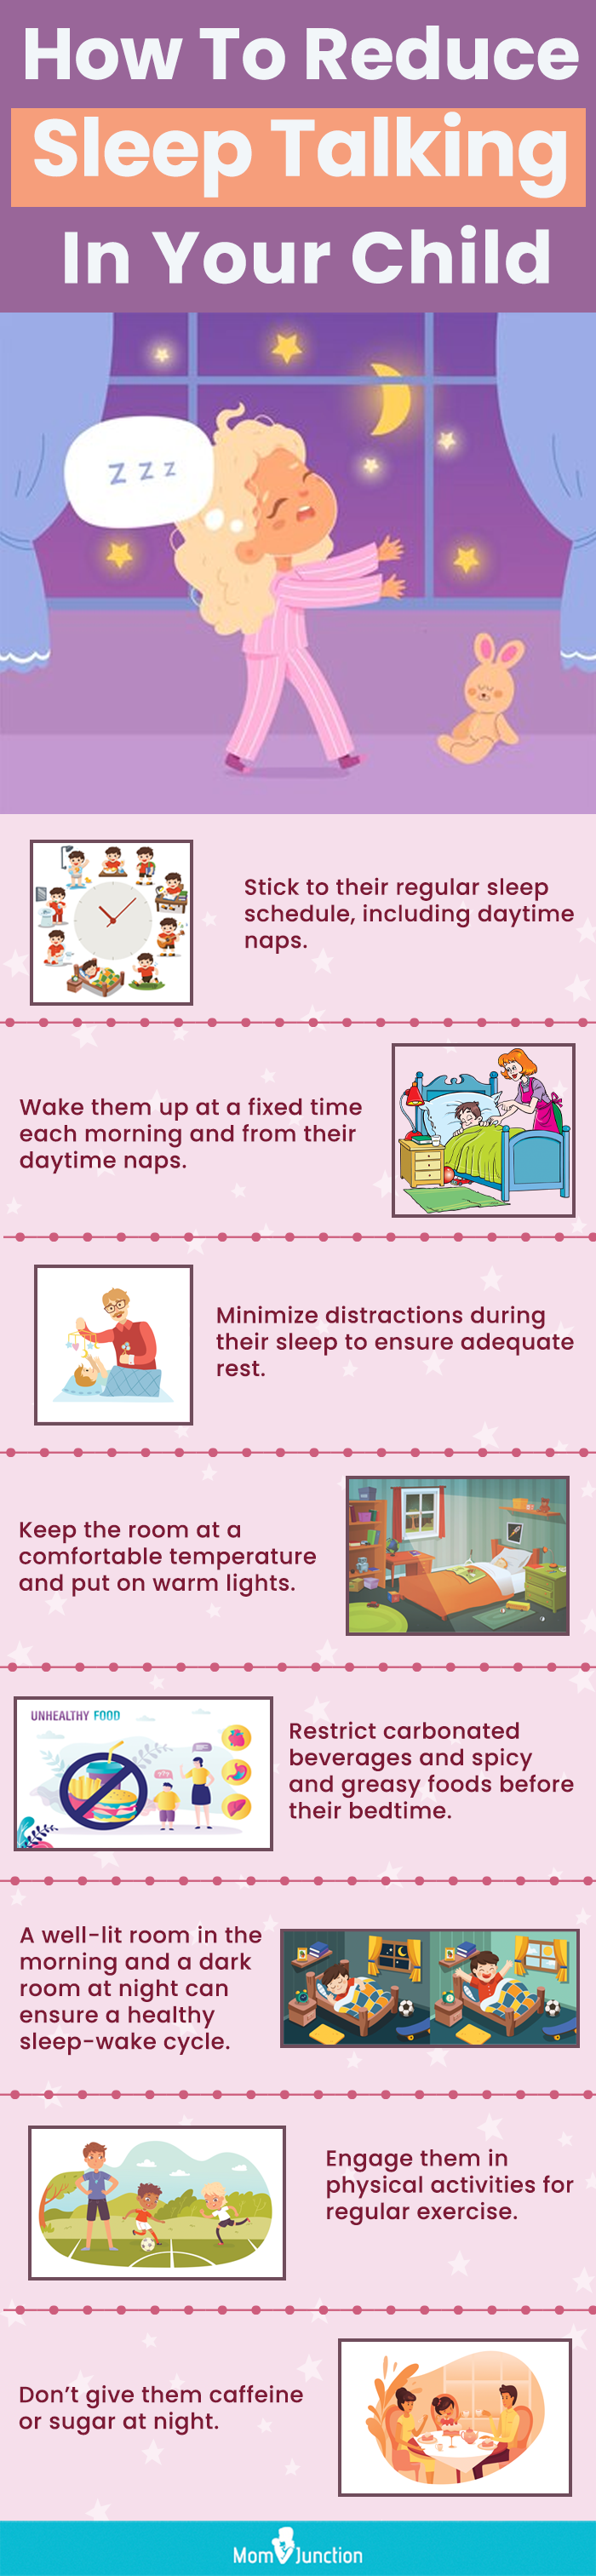 tips to manage sleep talking in children (infographic)